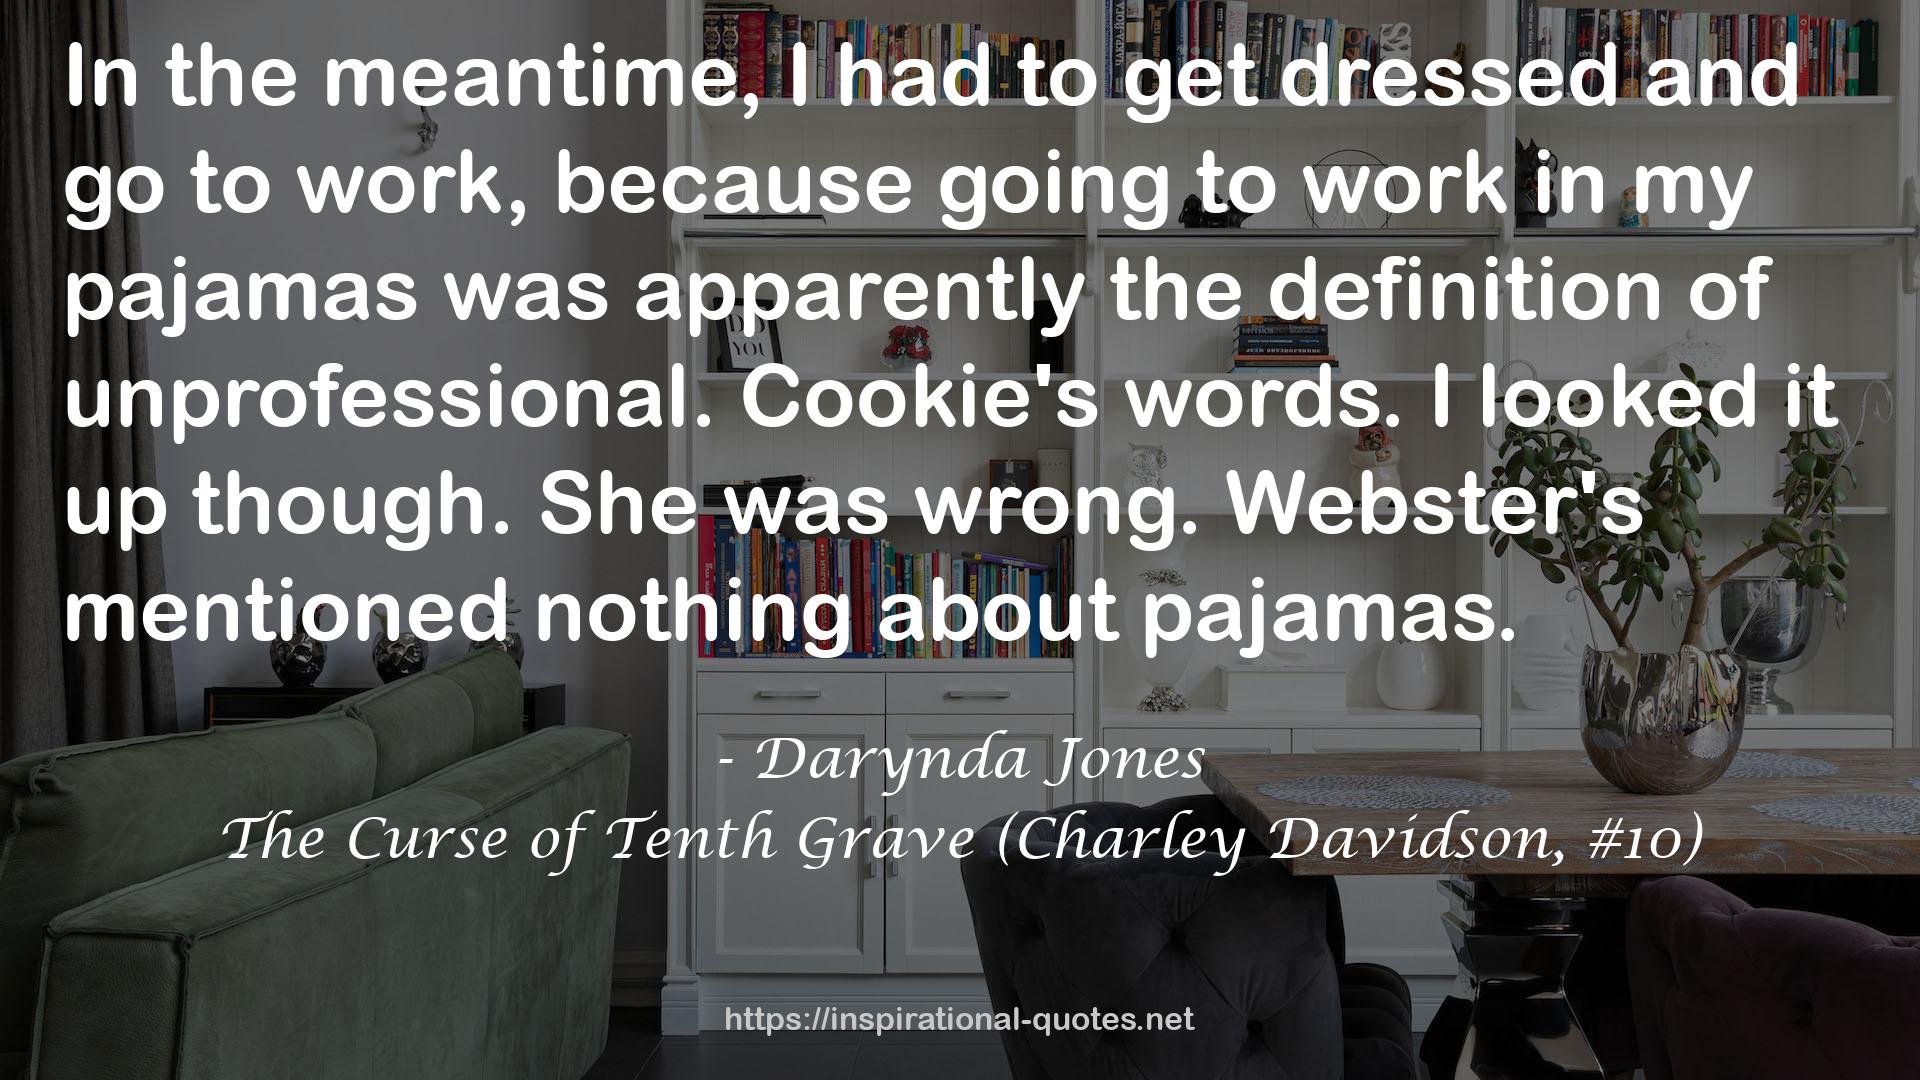 The Curse of Tenth Grave (Charley Davidson, #10) QUOTES